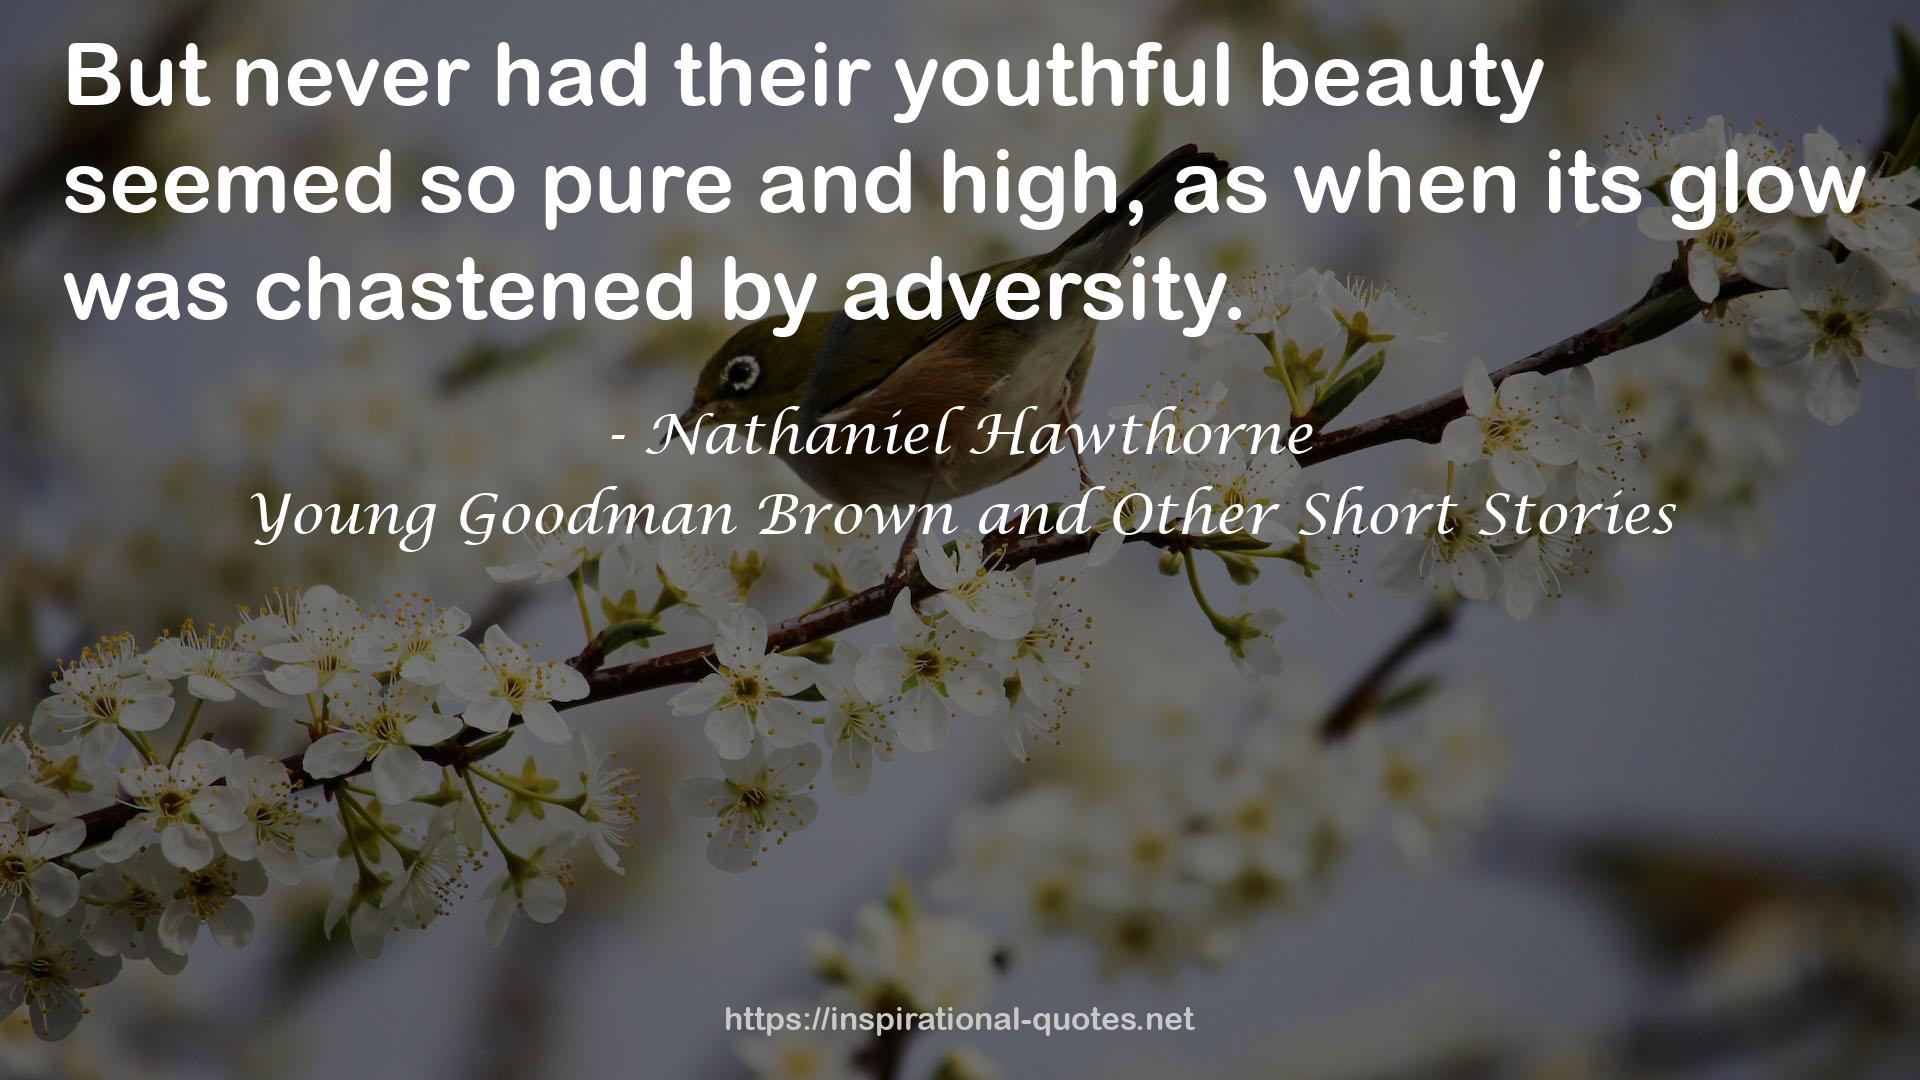 Young Goodman Brown and Other Short Stories QUOTES